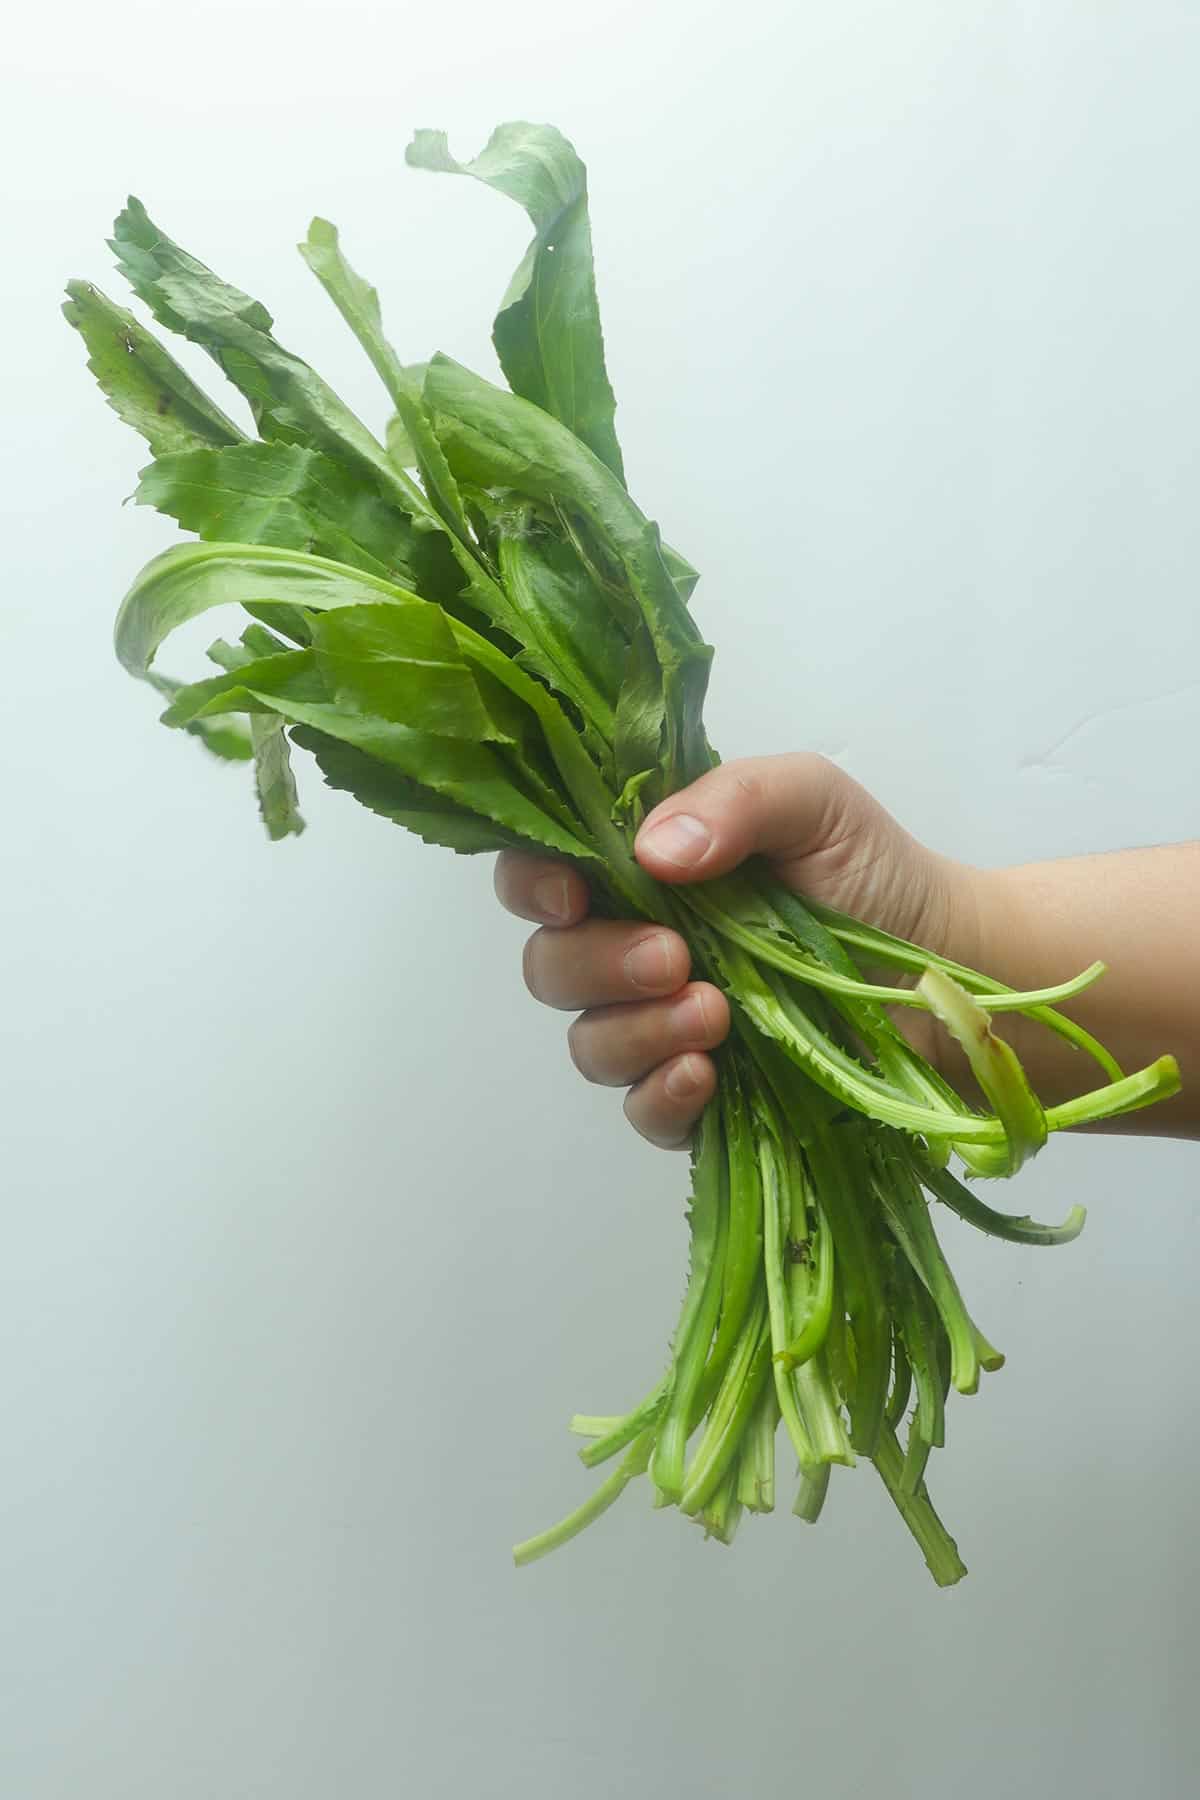 a hand grabbing a bunch of recao with a white background.